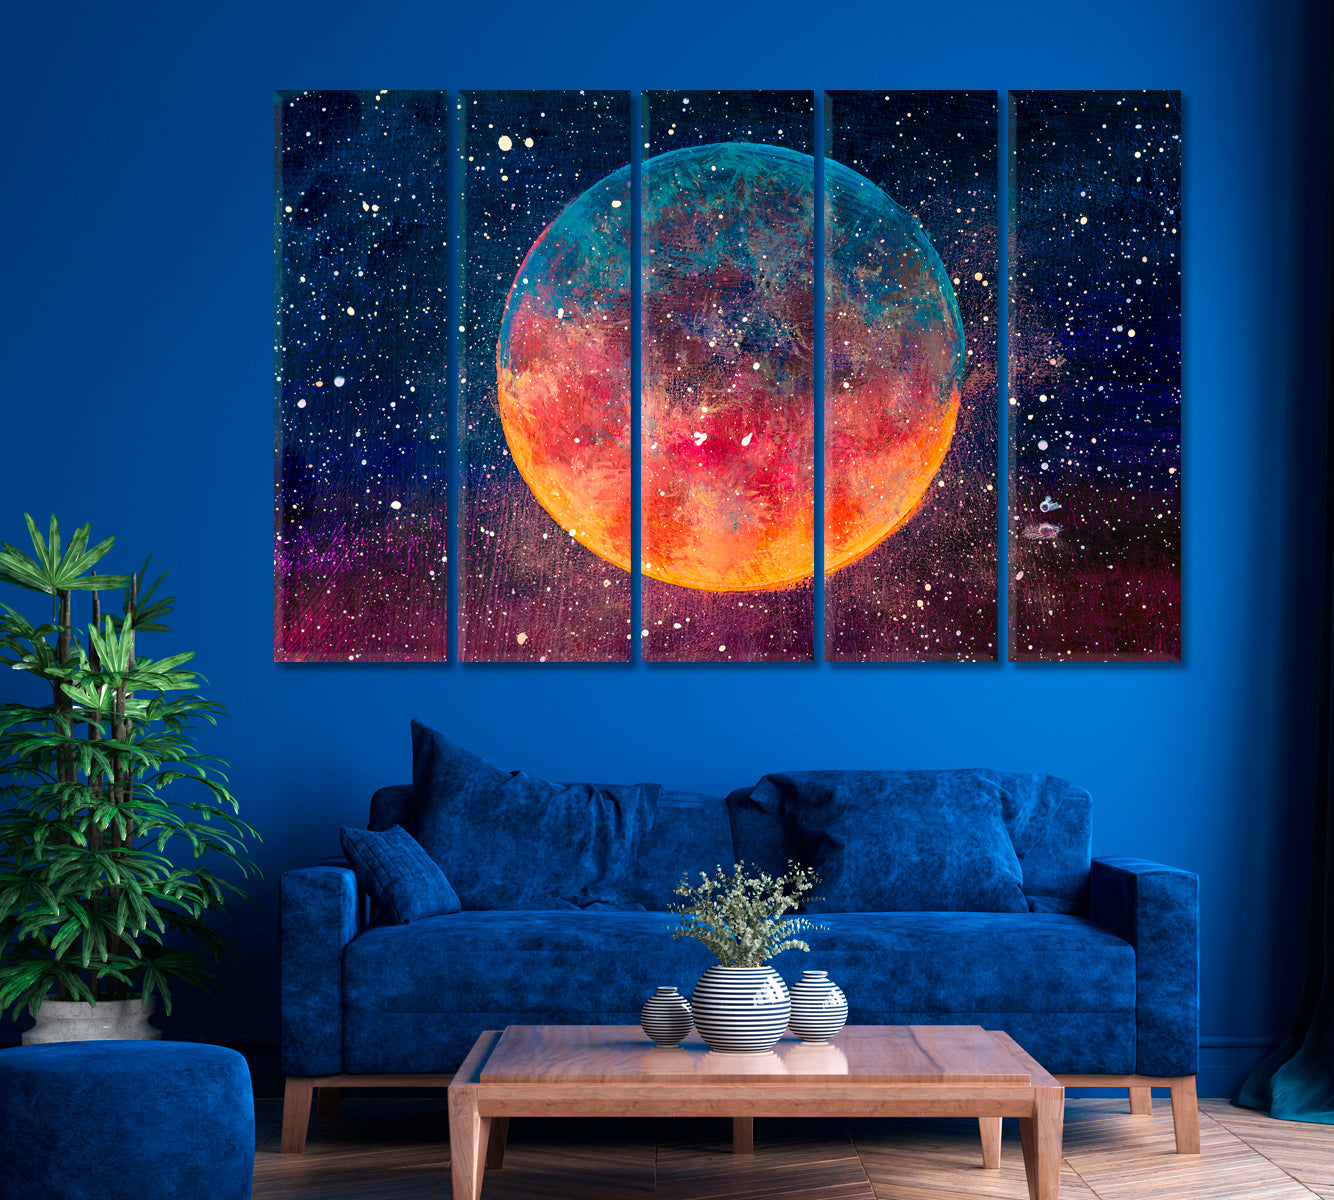 Fantasy Space Canvas Print ArtLexy 5 Panels 36"x24" inches 